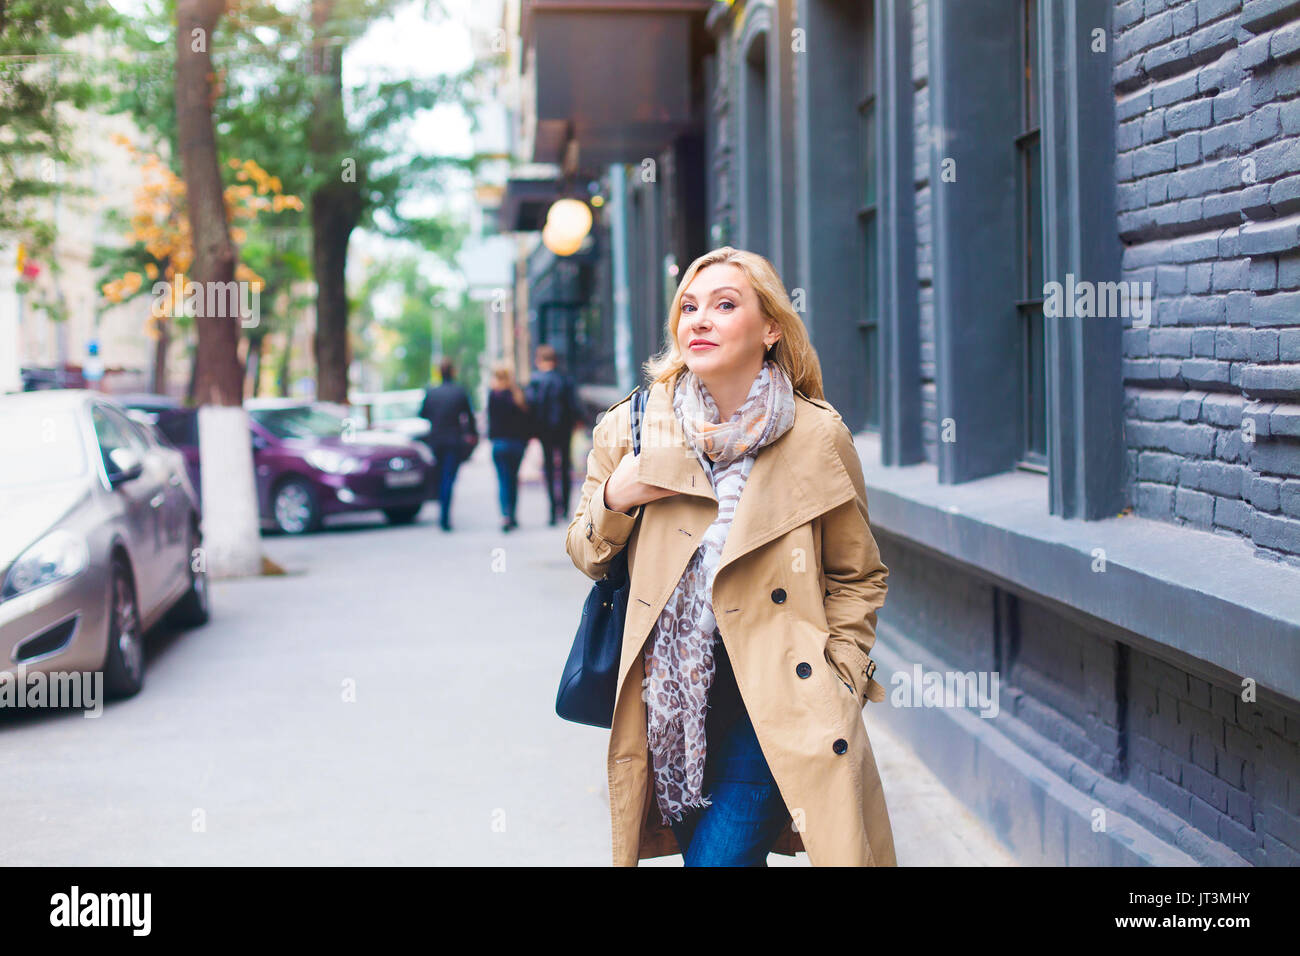 Middle age women goes through the city and smiles. Happiness concept. Stock Photo